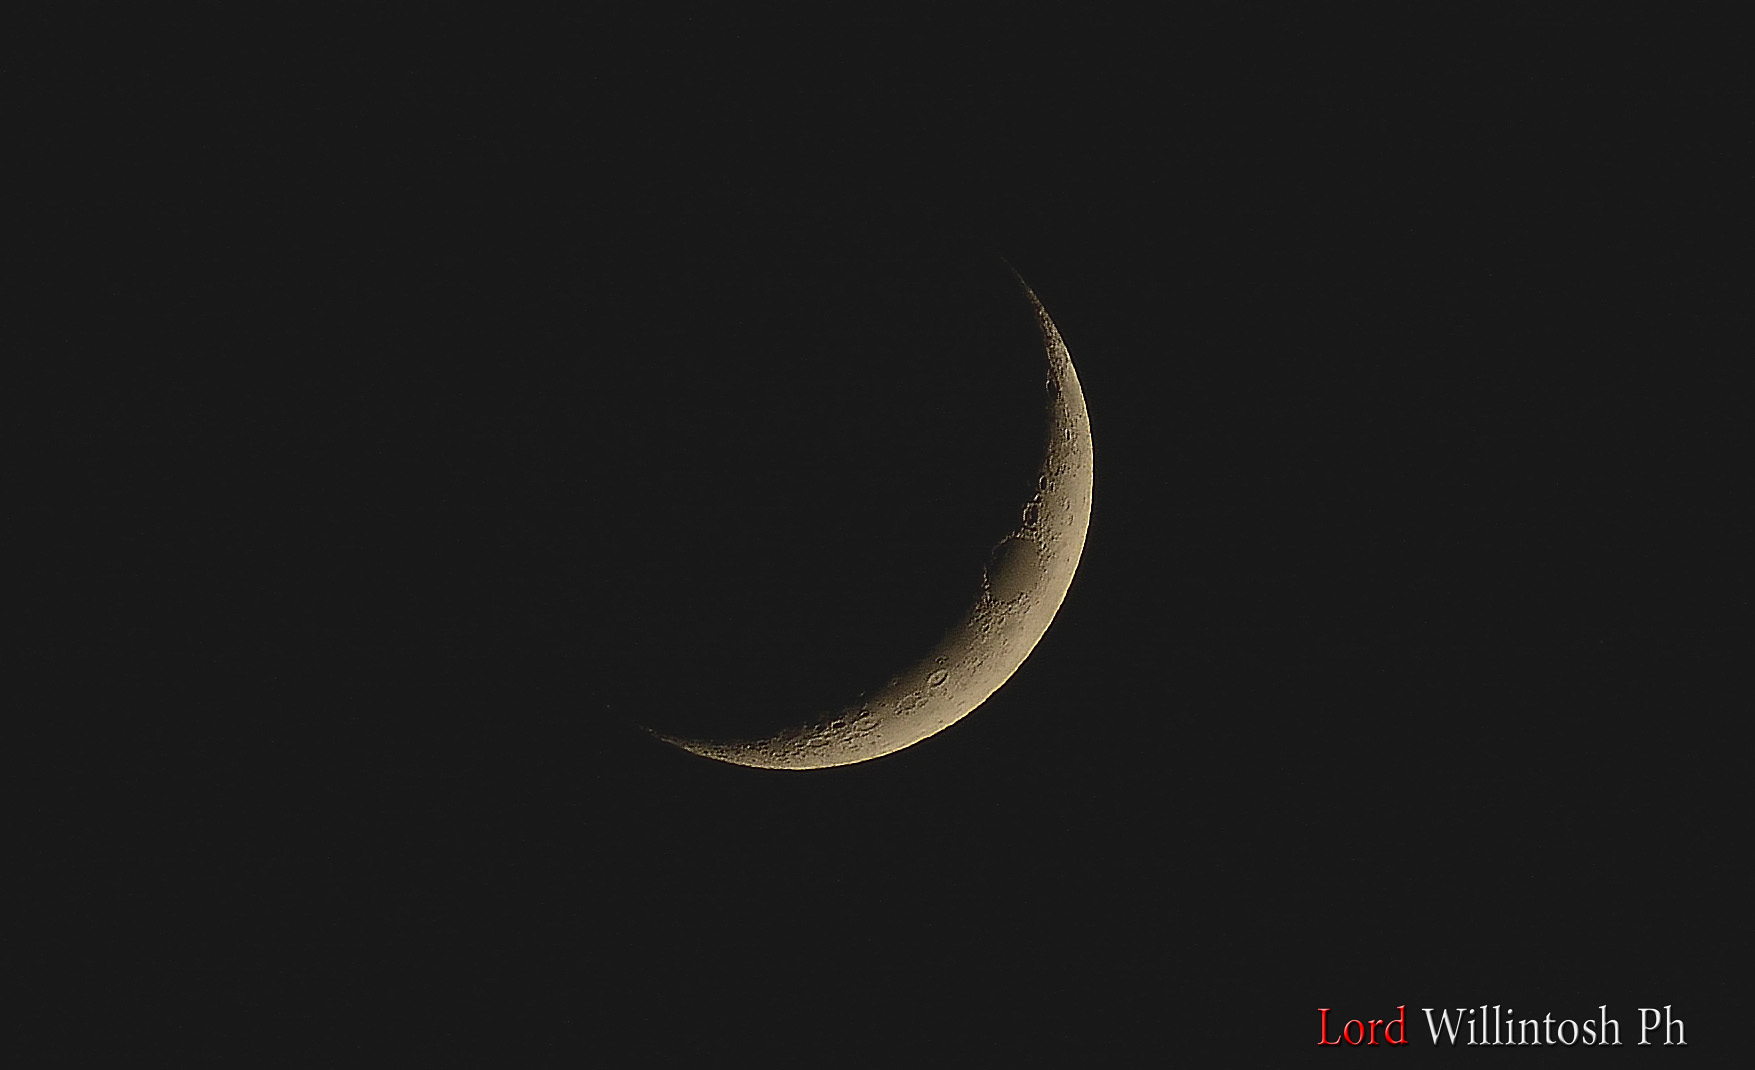 Moon to 300mm...